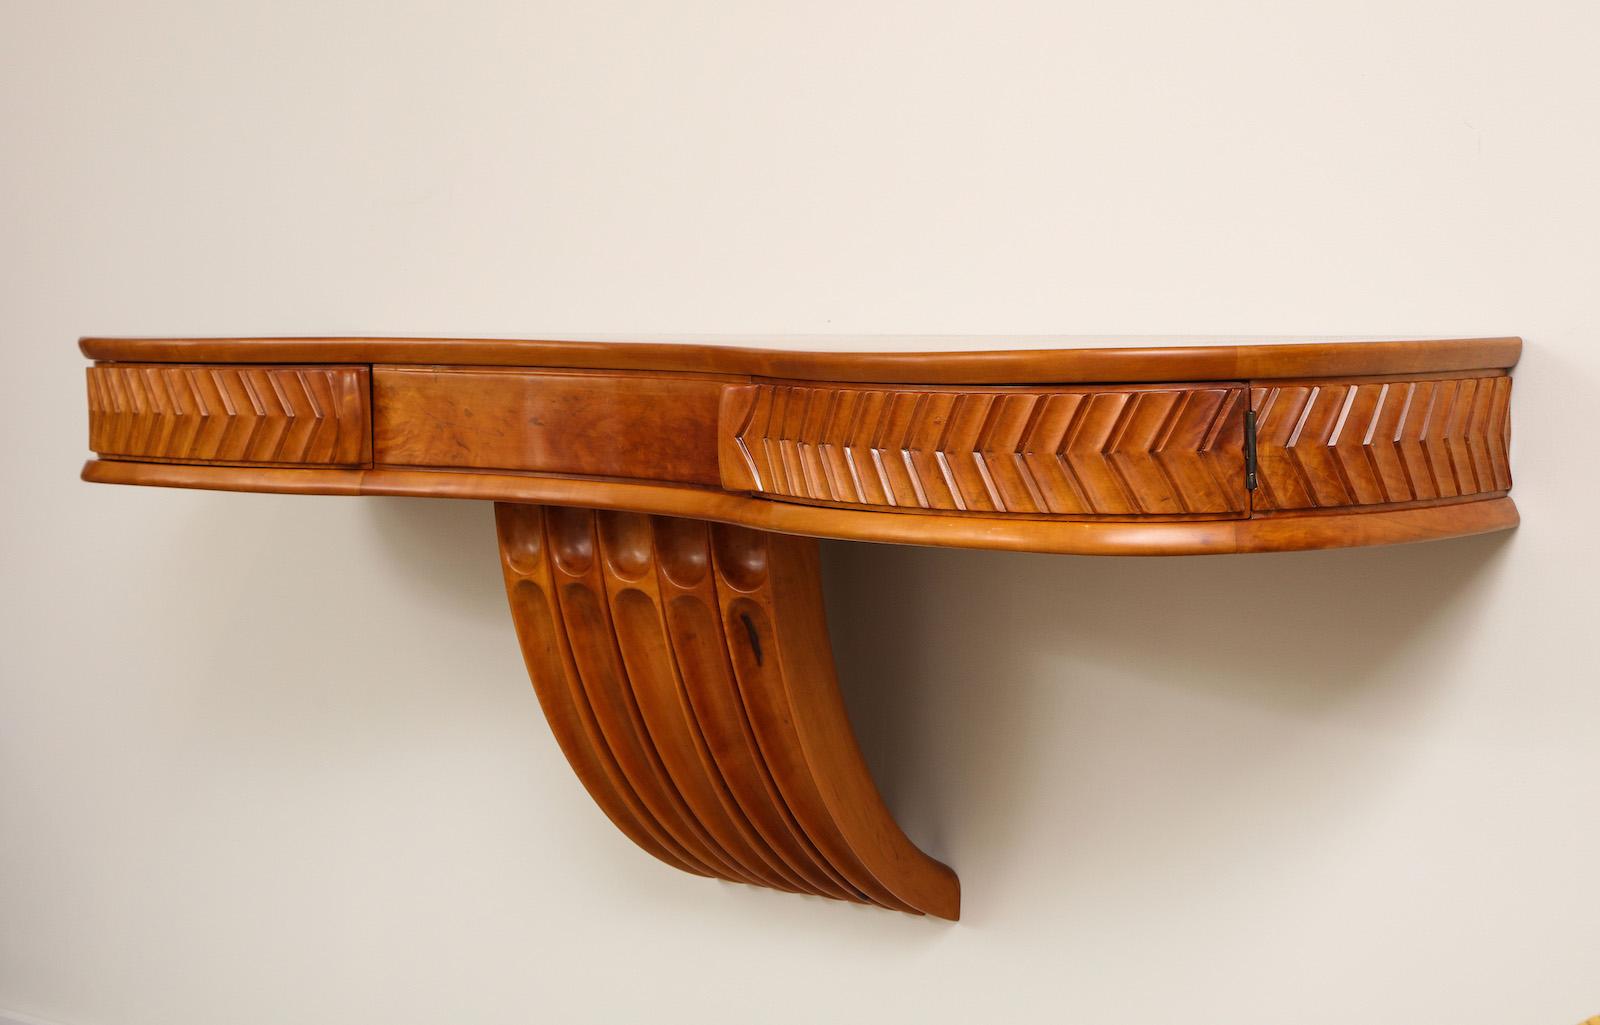 Wall Mounted Console Table by Osvaldo Borsani for ABV.  Console table of maple with carvings, central support & 2 drawers that each open on a concealed pivot.   Wood has recently been refinished.  Authenticated by the Archivio Osvaldo